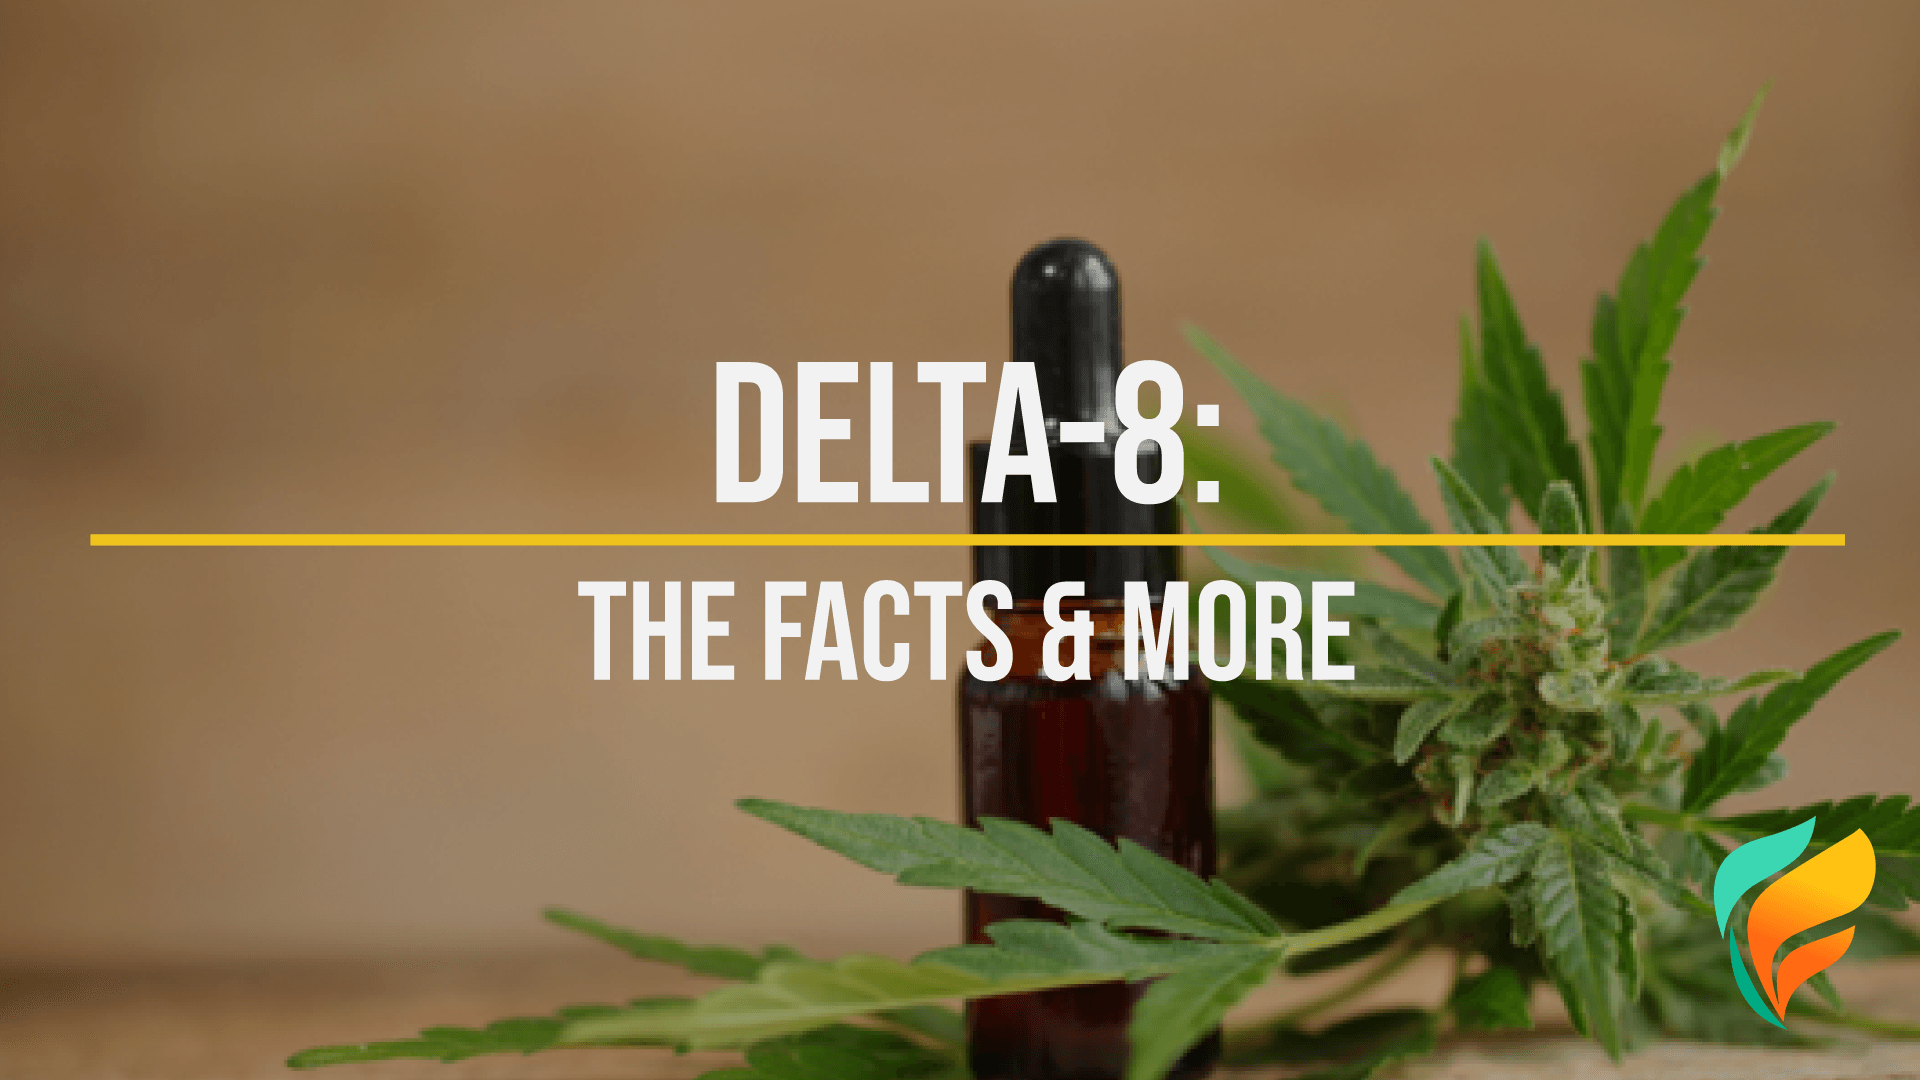 How Long Does a Delta-8 High Last?